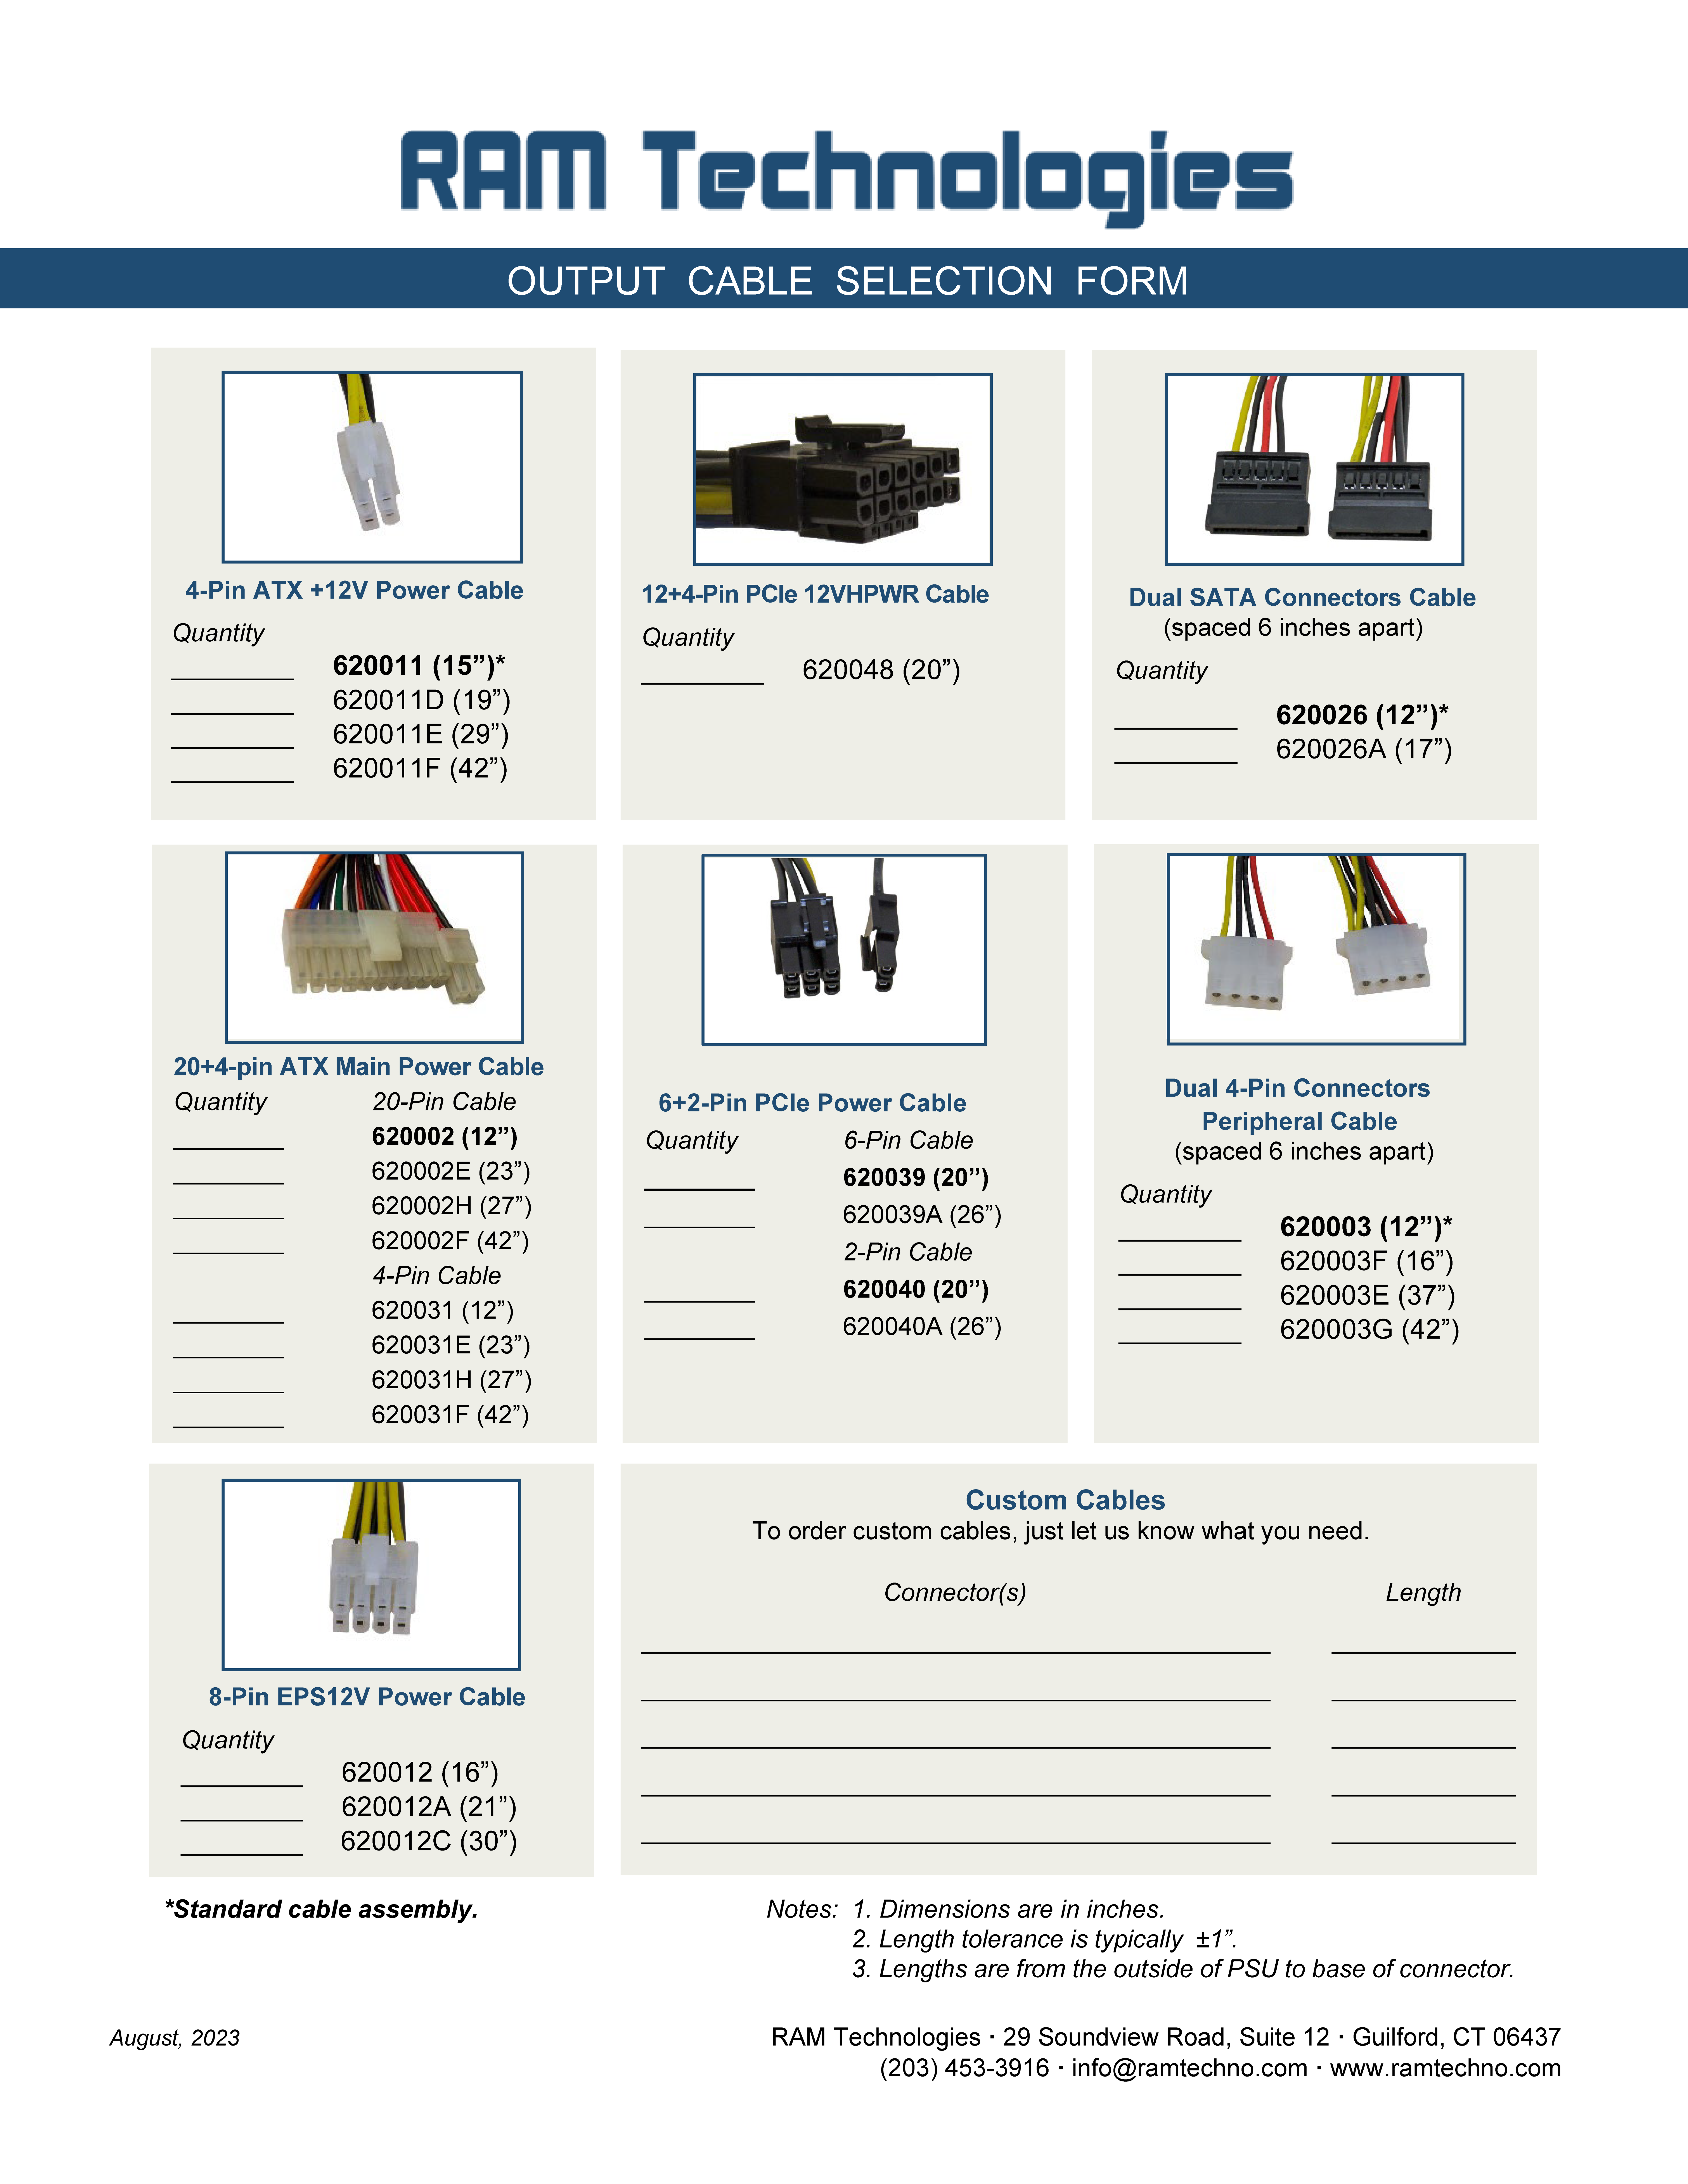 Use the PDF form to select output cables or contact us for custom cables.